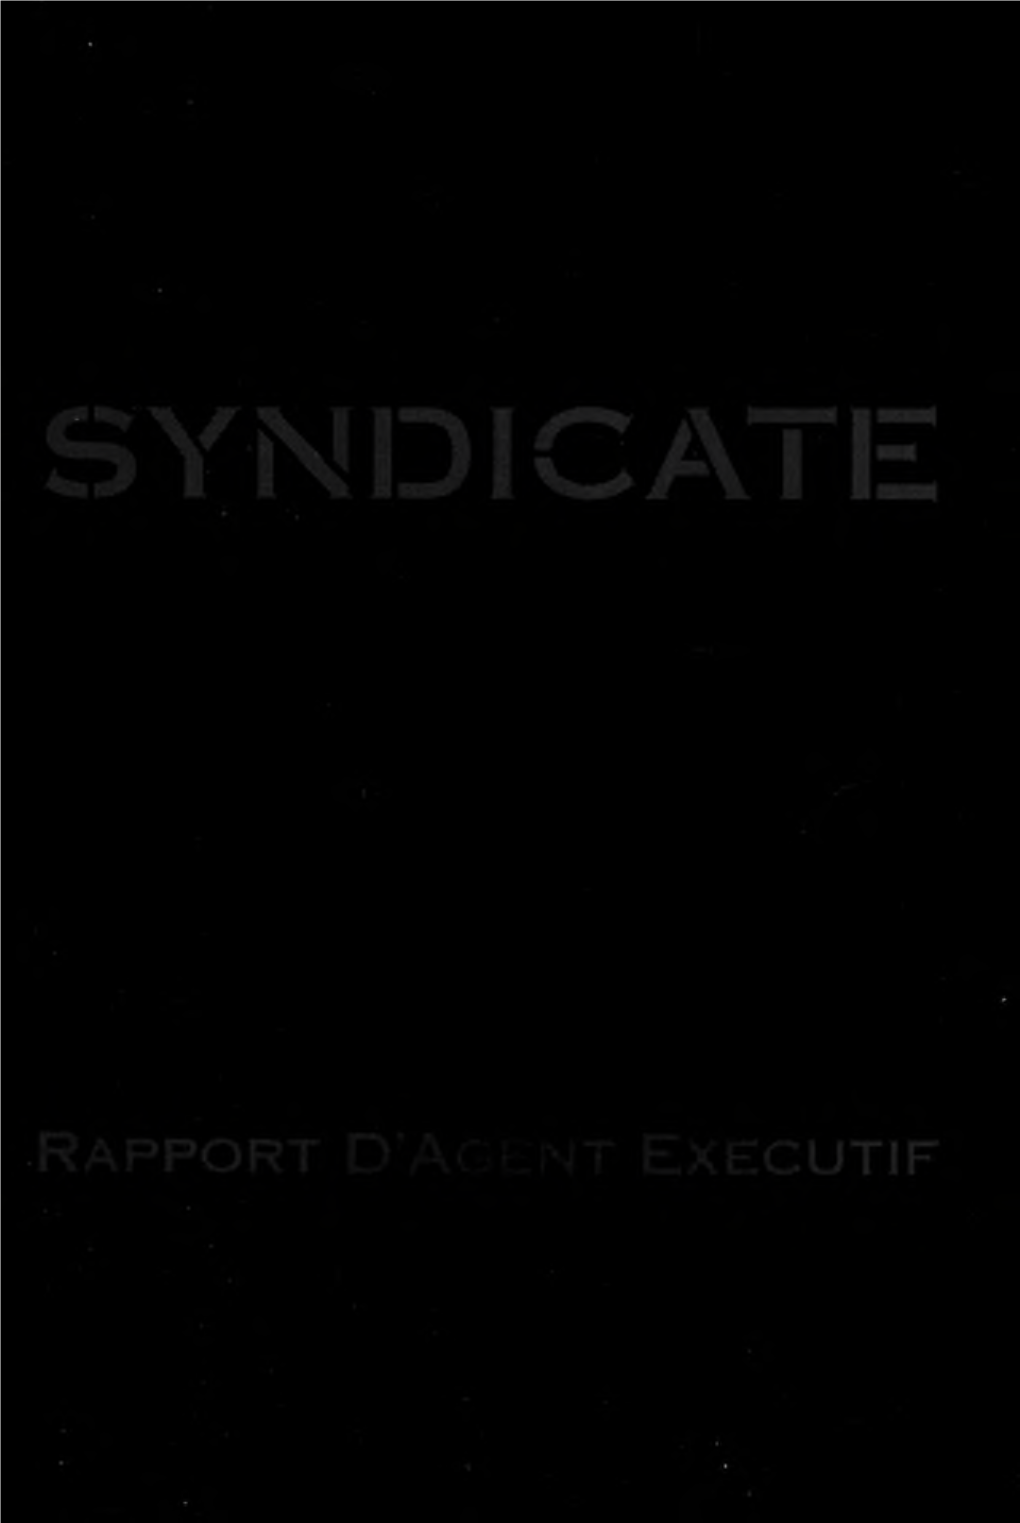 Syndicate Syndicate